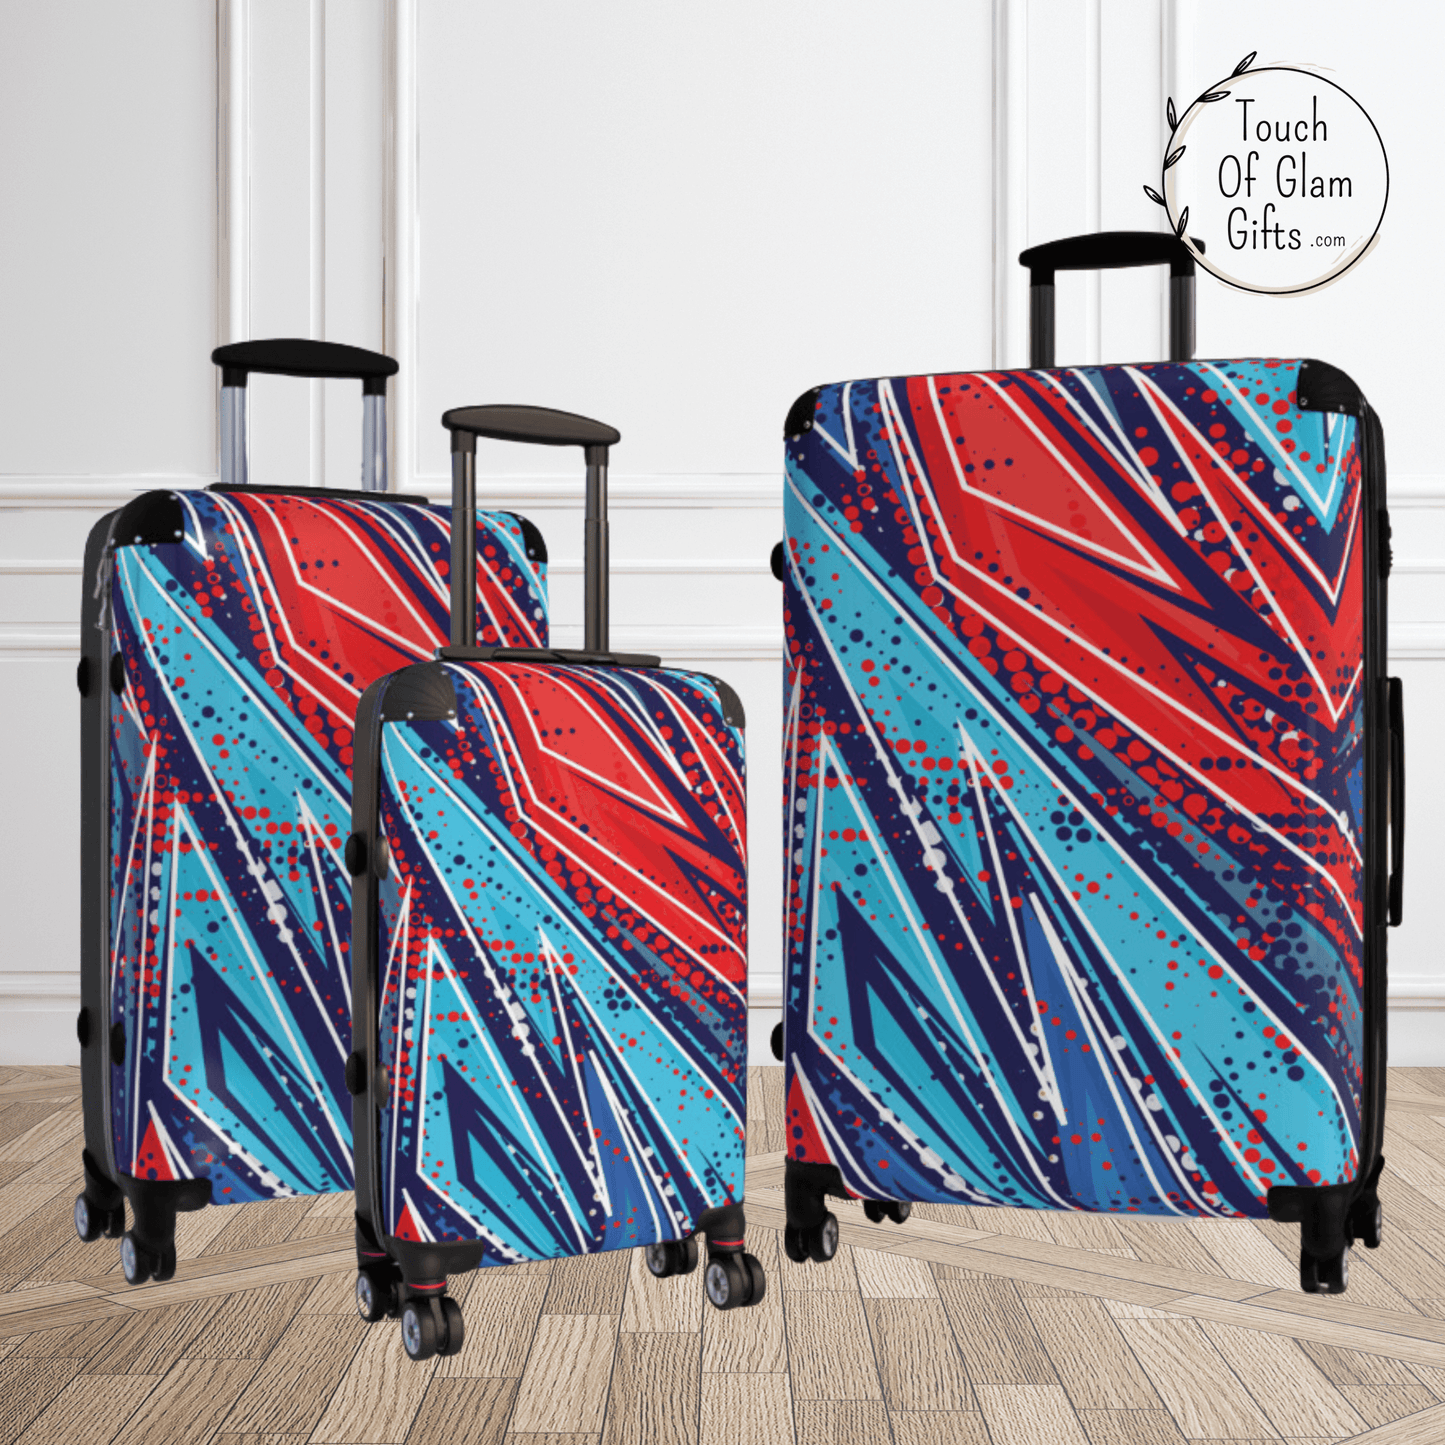 This luggage makes the perfect personalized gift for teens. The custom travel gear is perfect for long trips or just the small carry on suitcase is perfect too.